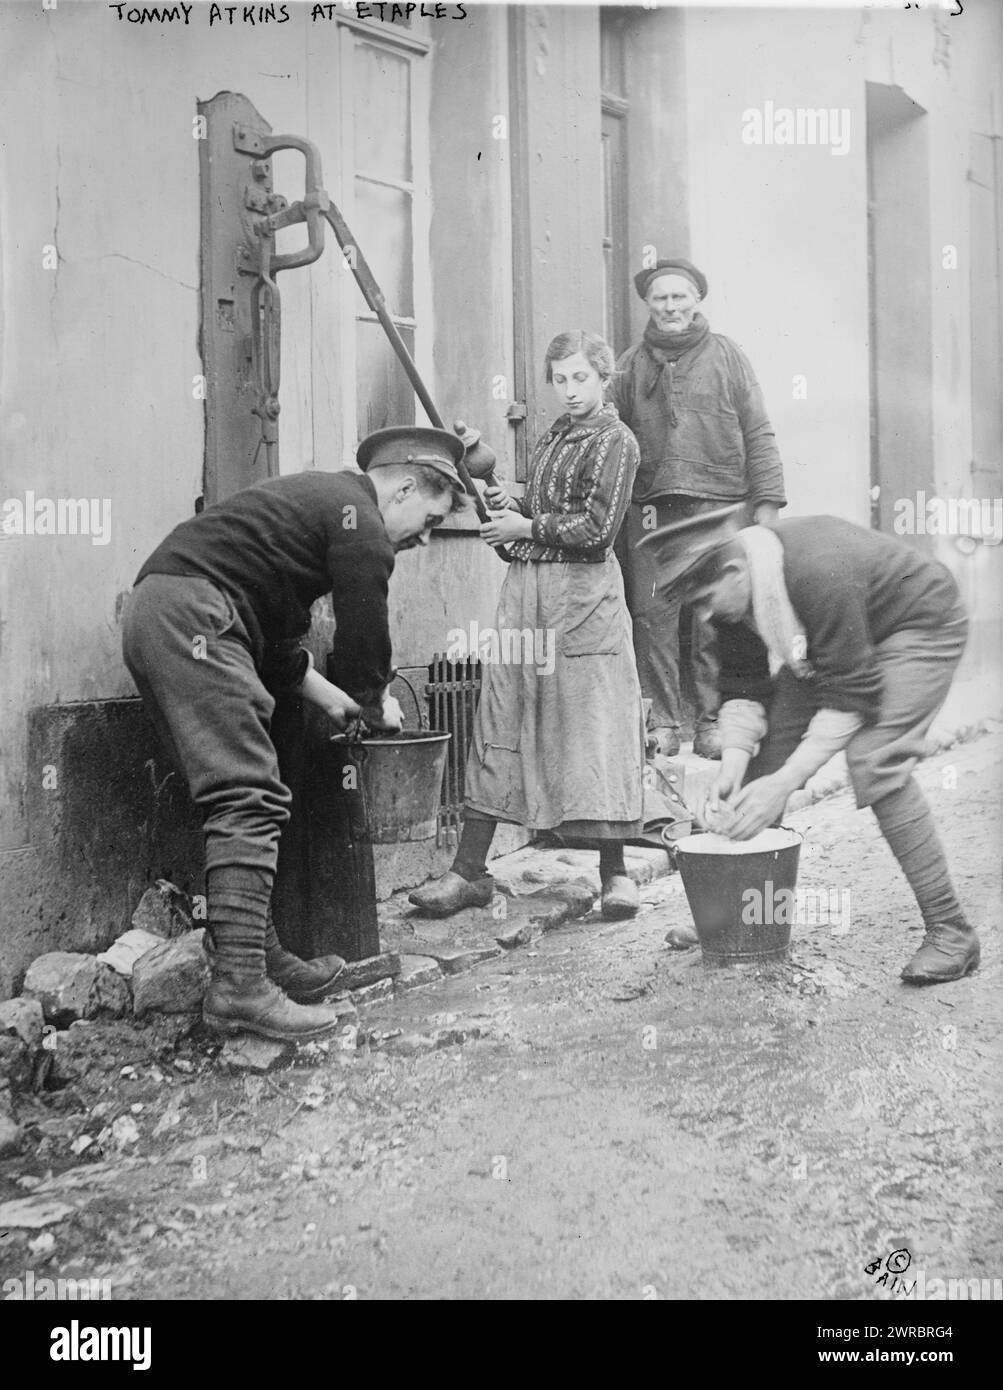 Tommy Atkins at Etaples, Photograph shows two British soldiers called 'Tommys,' helping some local residents at a water pump, Étaples, France, during World War I., between 1914 and ca. 1915, World War, 1914-1918, Glass negatives, 1 negative: glass Stock Photo